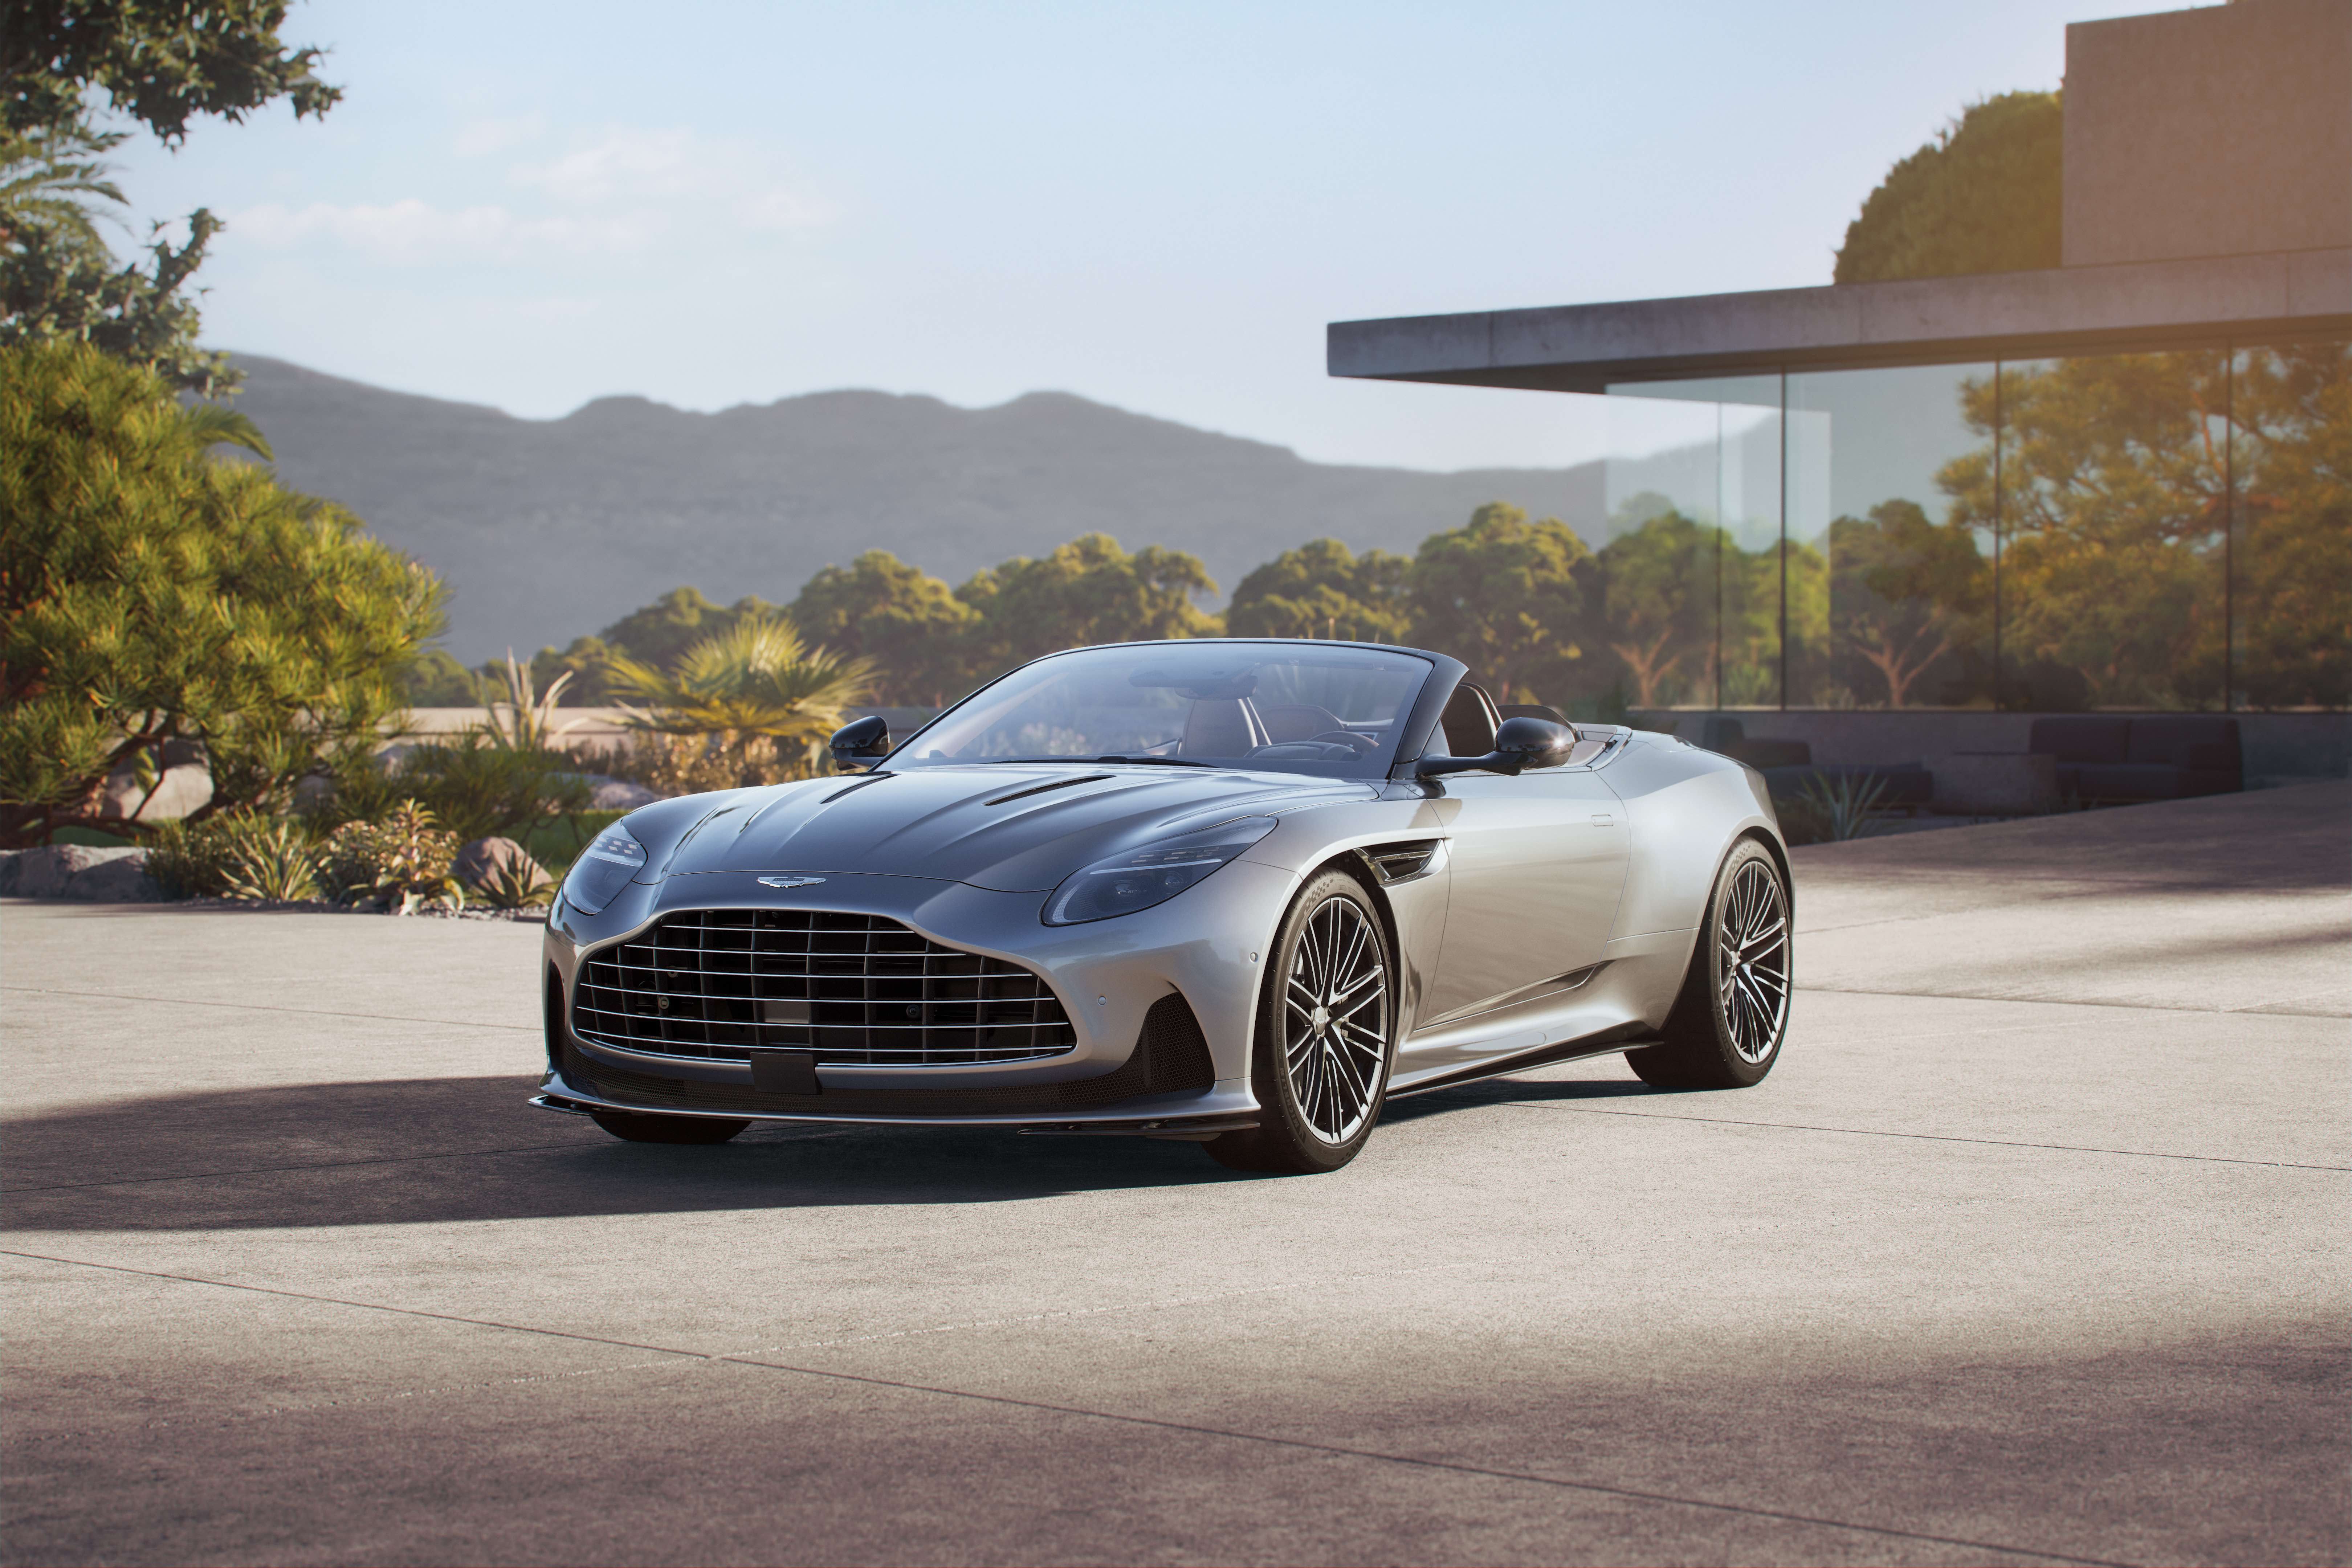 Aston Martin Cars: Reviews, Pricing, and Specs